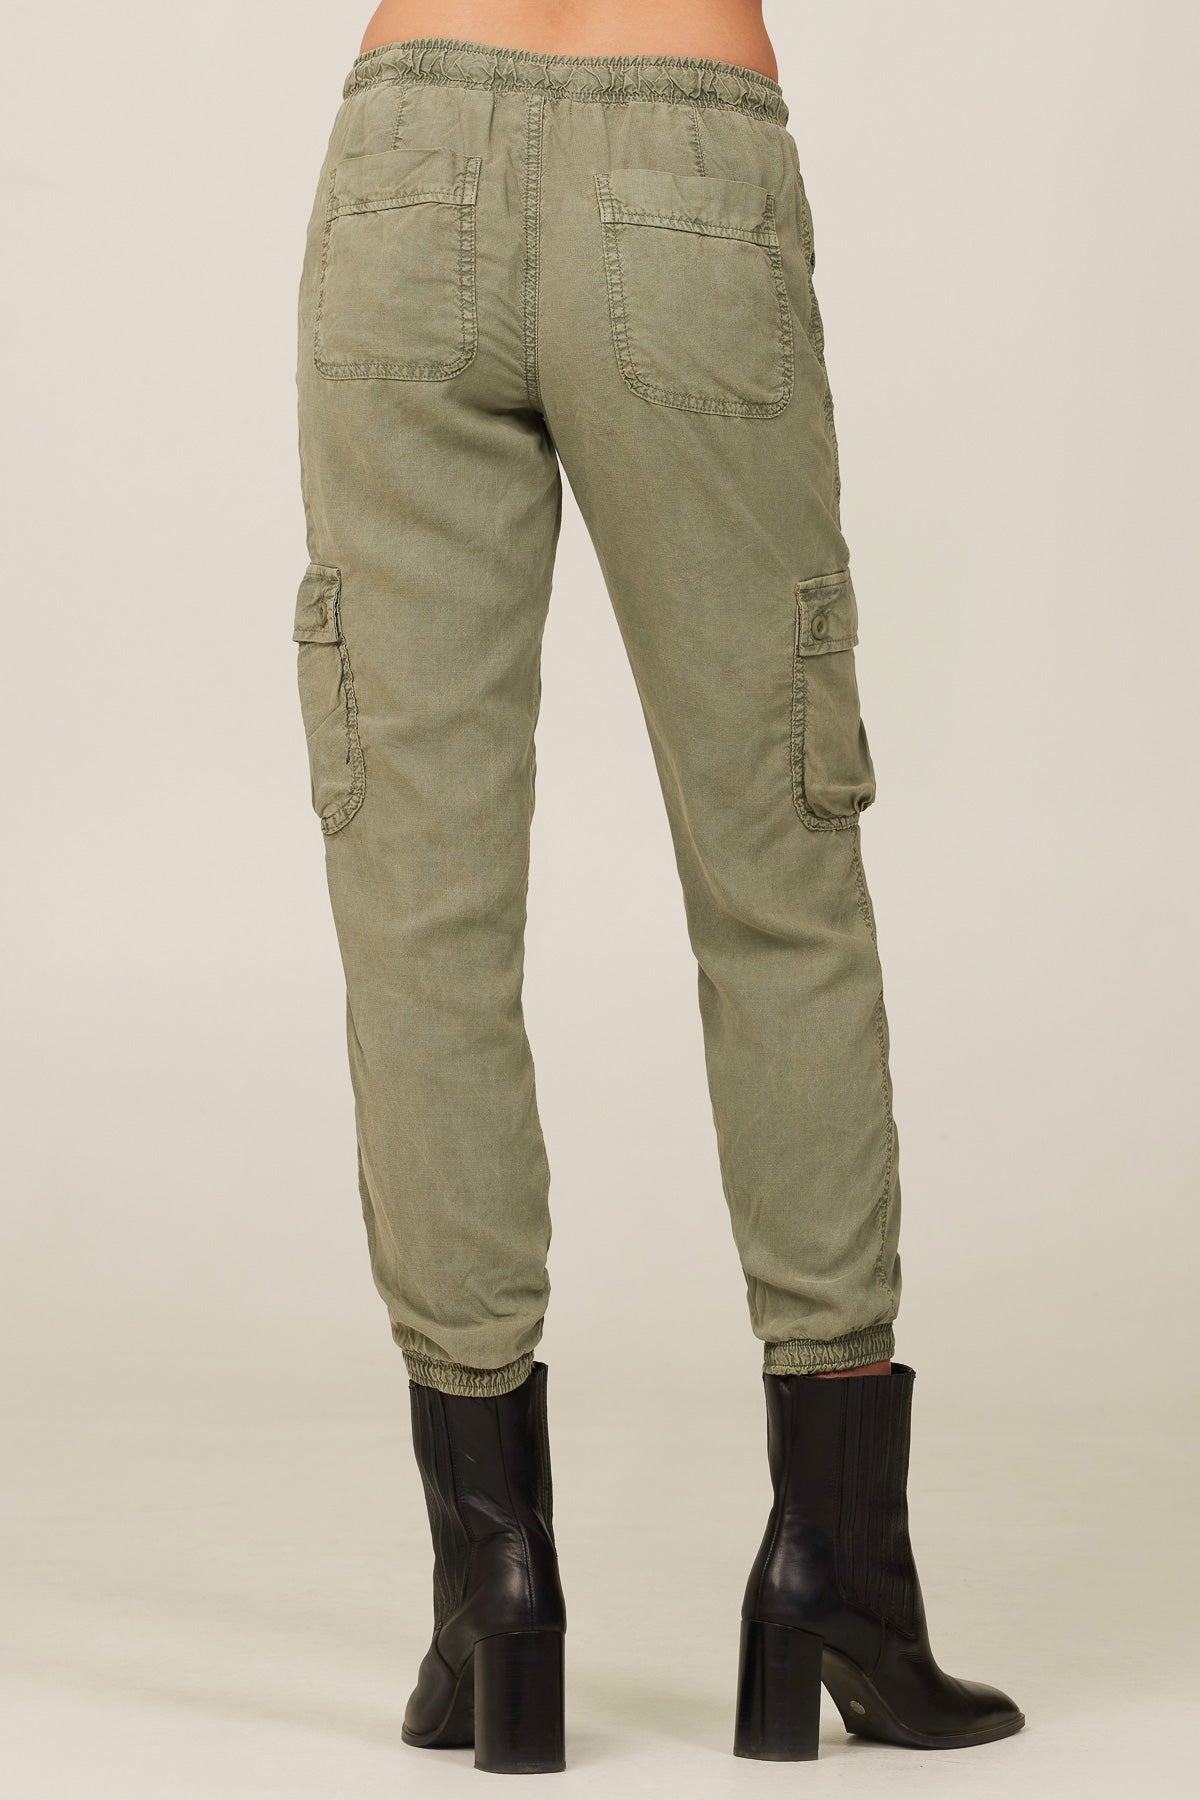 Bella DahlCargo Track Pants - Soft ArmyBottoms